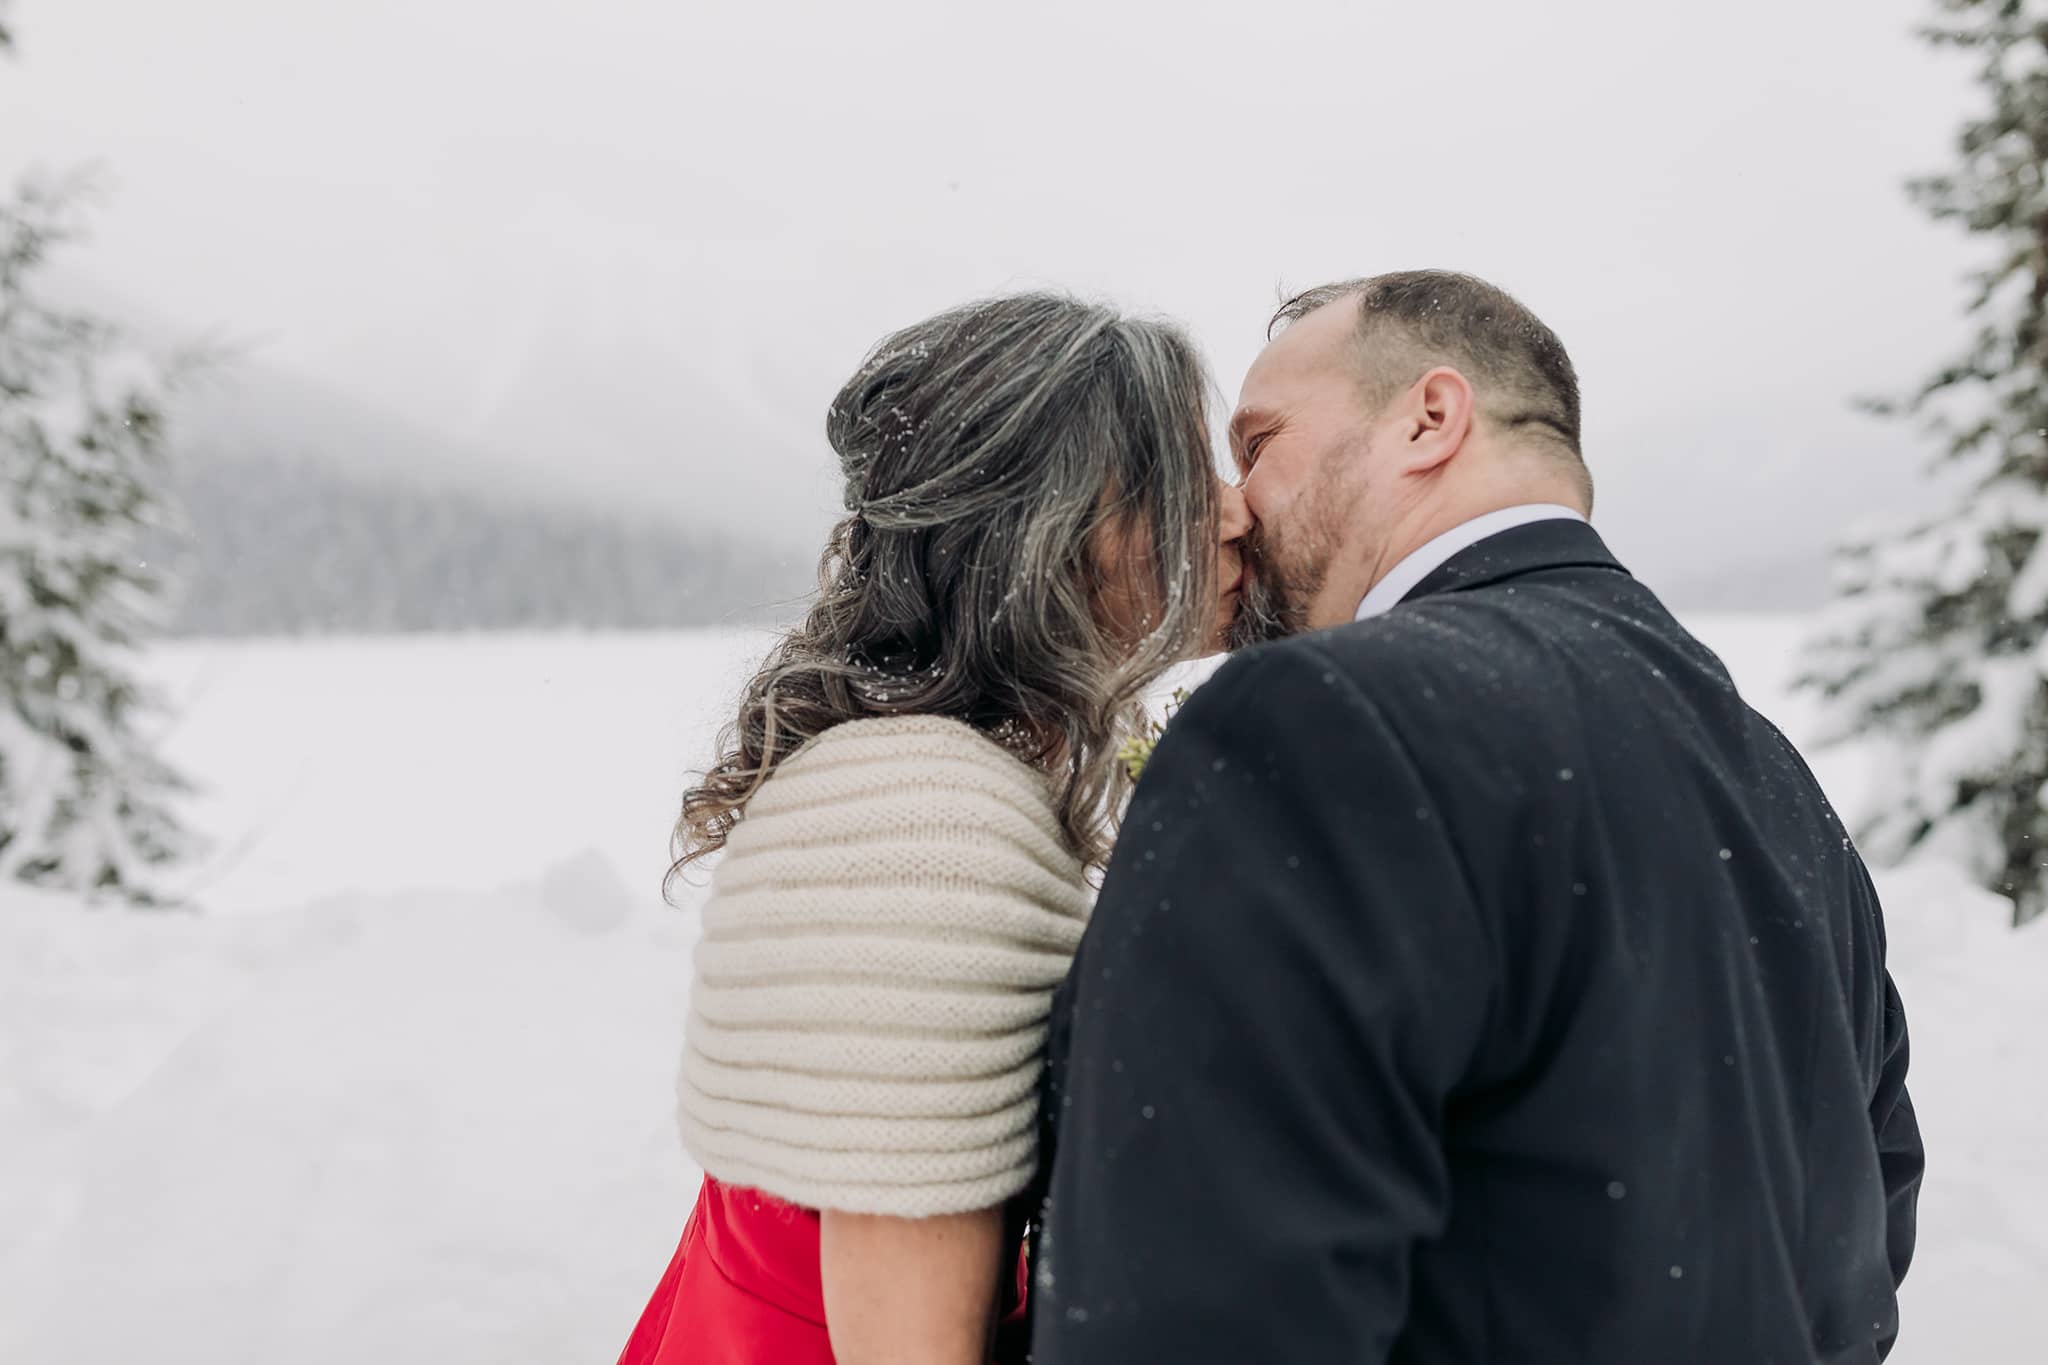 Emerald Lake Lodge winter outdoor wedding ceremony at the snowy Viewpoint